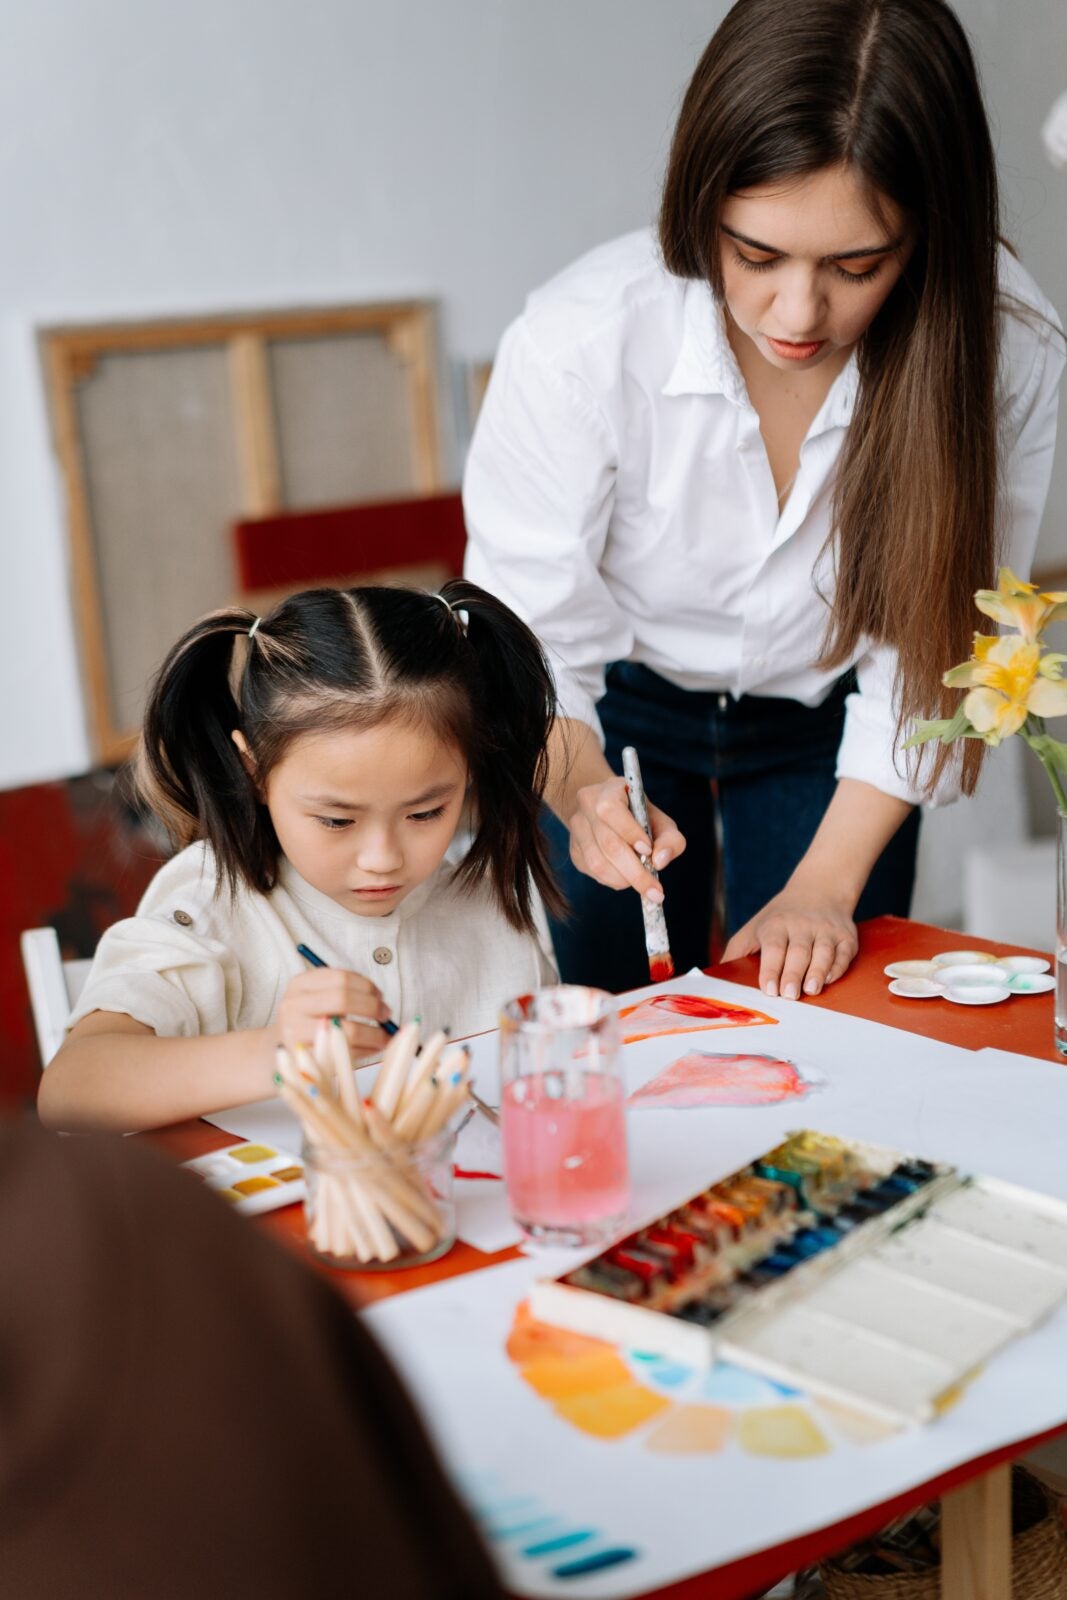 An asian child is doing watercolour art while an older woman stands above her and joins in.